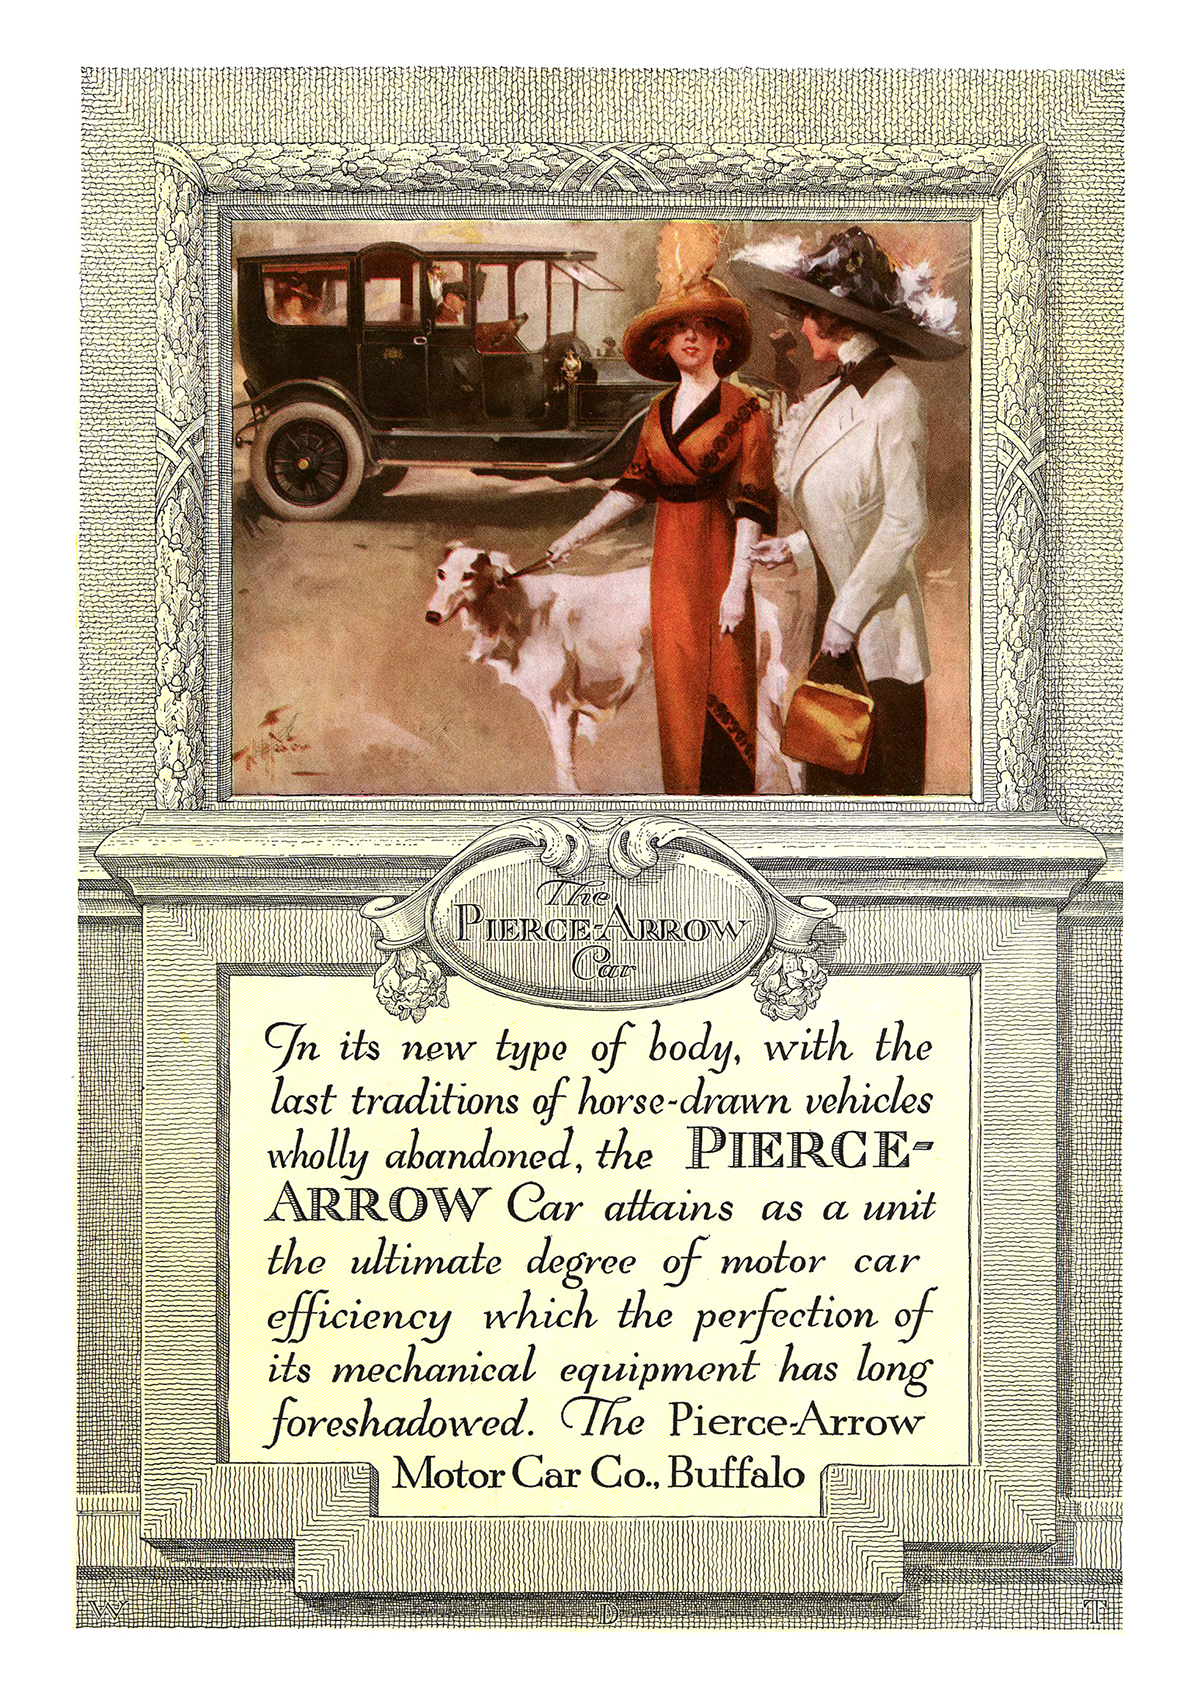 Pierce-Arrow Ad (September, 1912) – Illustrated by William Harnden Foster